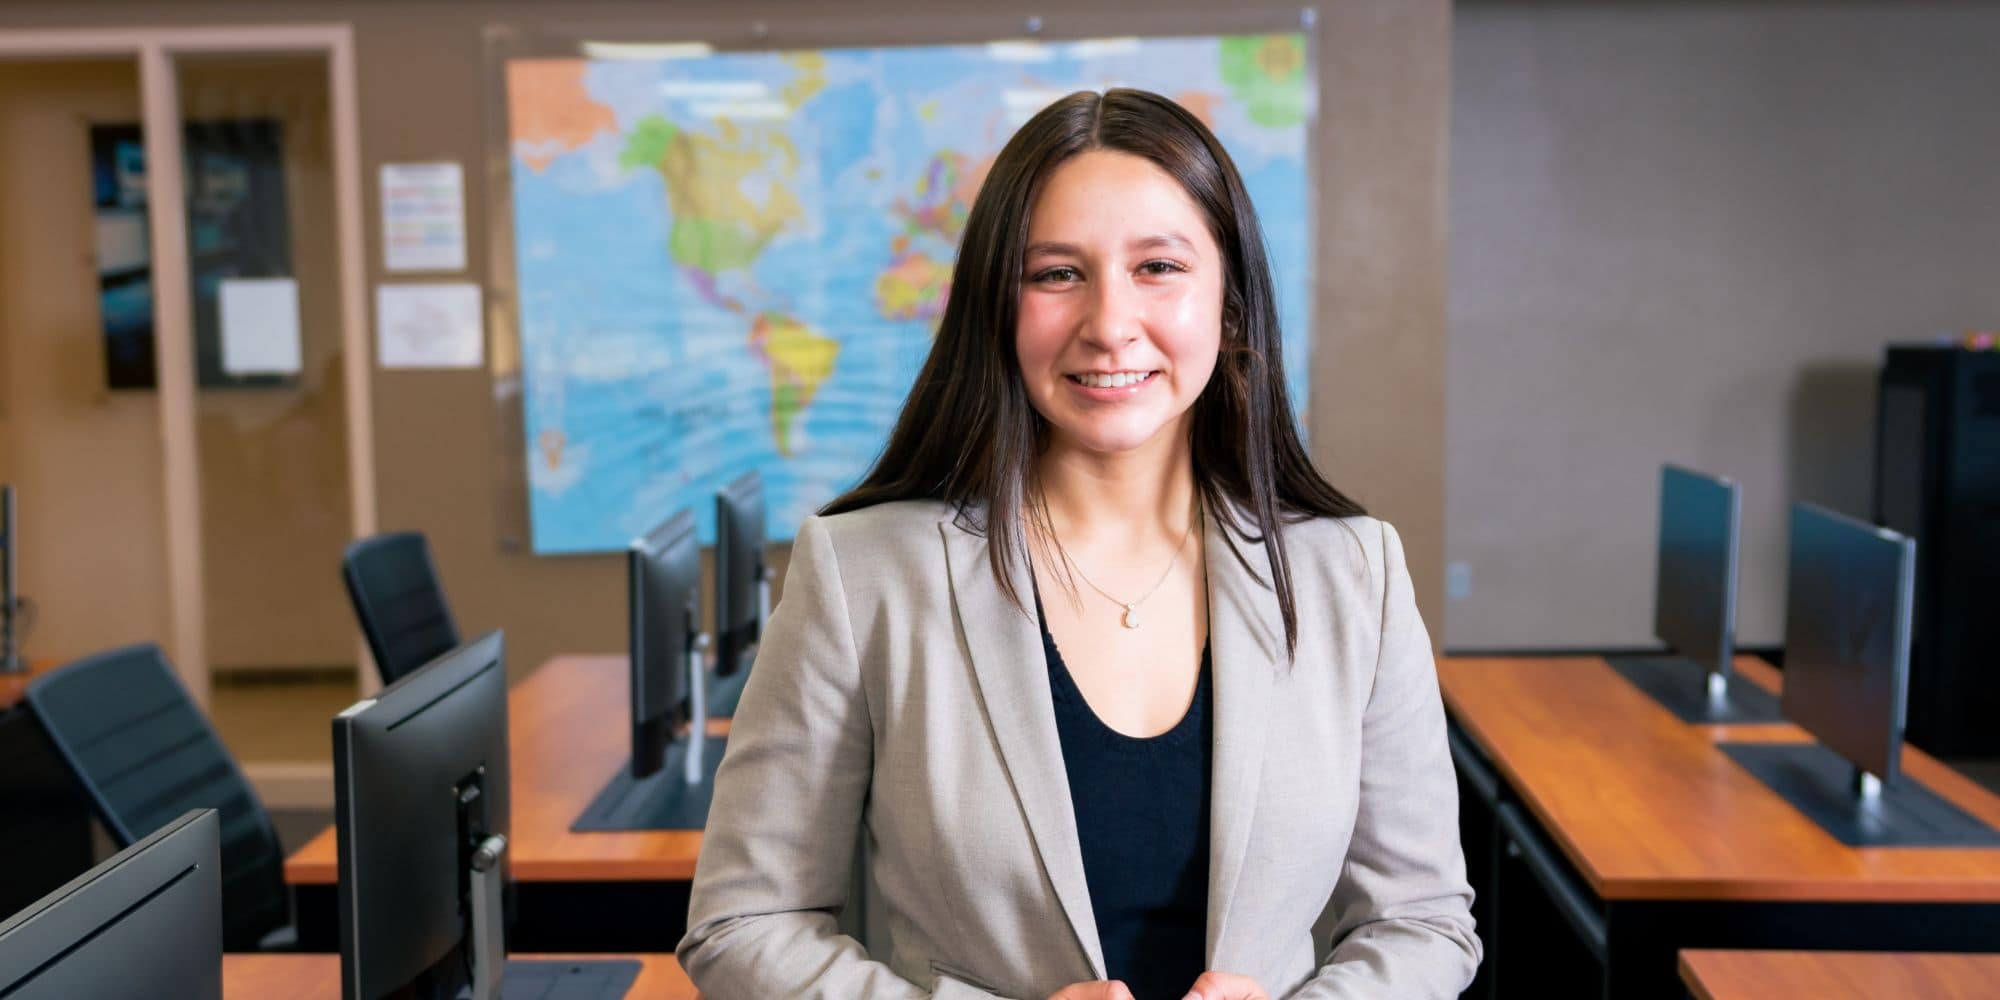 Faith Vasquez ('25) was inspired to major in Global Business and Supply Chain Management after observing the affects the pandemic had on the global supply chain. (Photo: Embry-Riddle/Connor McShane)